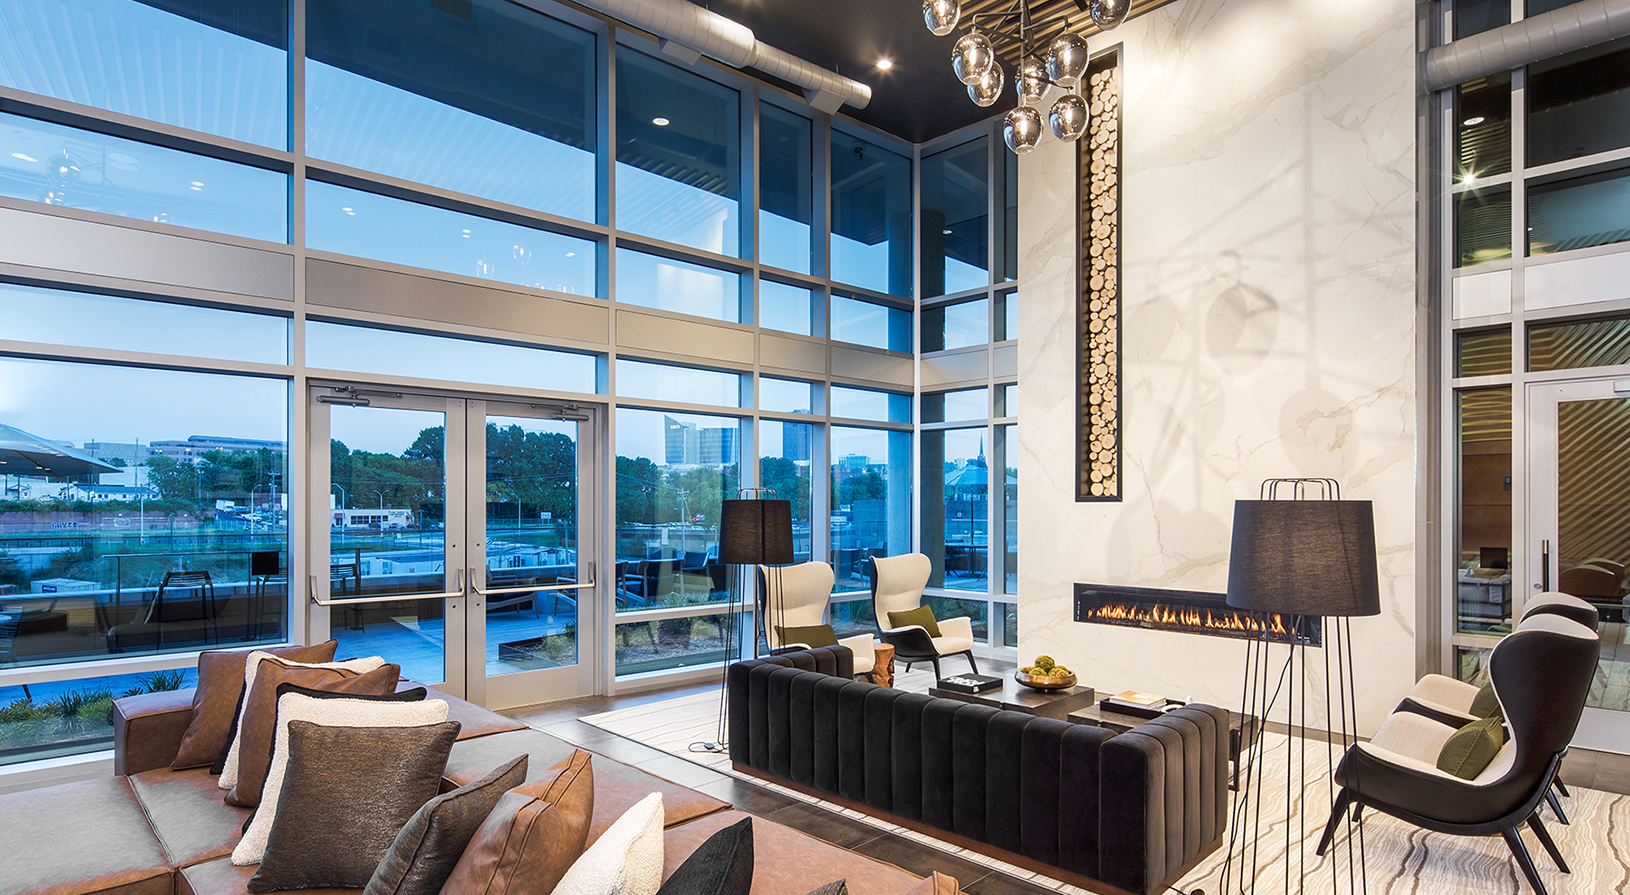 Peace Raleigh Apartments clubroom with large fireplace and wall to wall windows with a view of the city at sundown